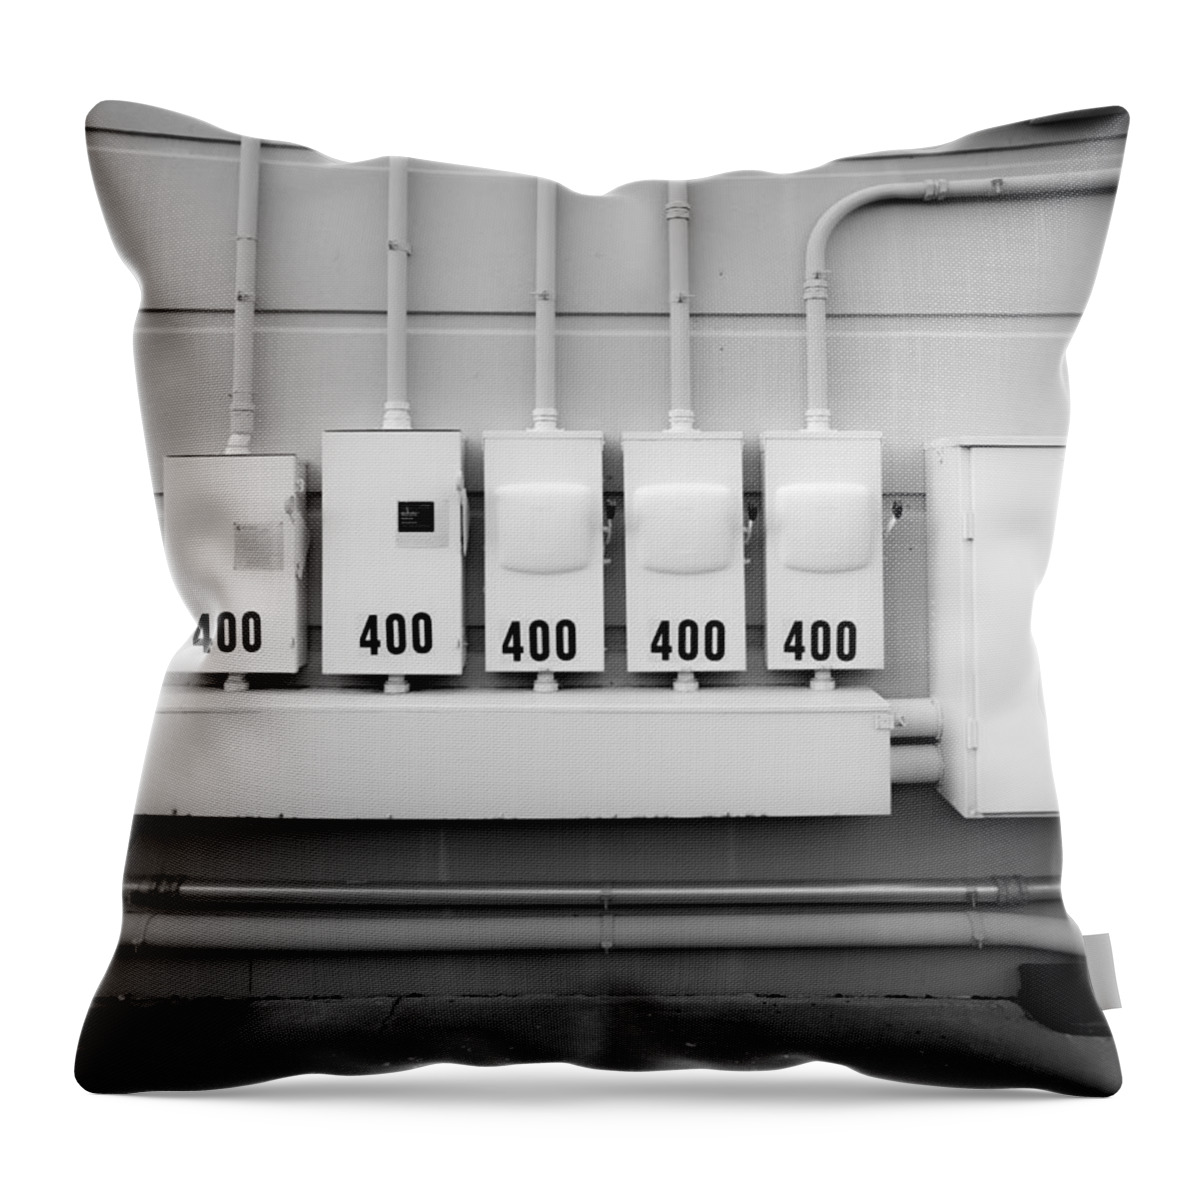 Texas Throw Pillow featuring the photograph Power 400 by Erich Grant